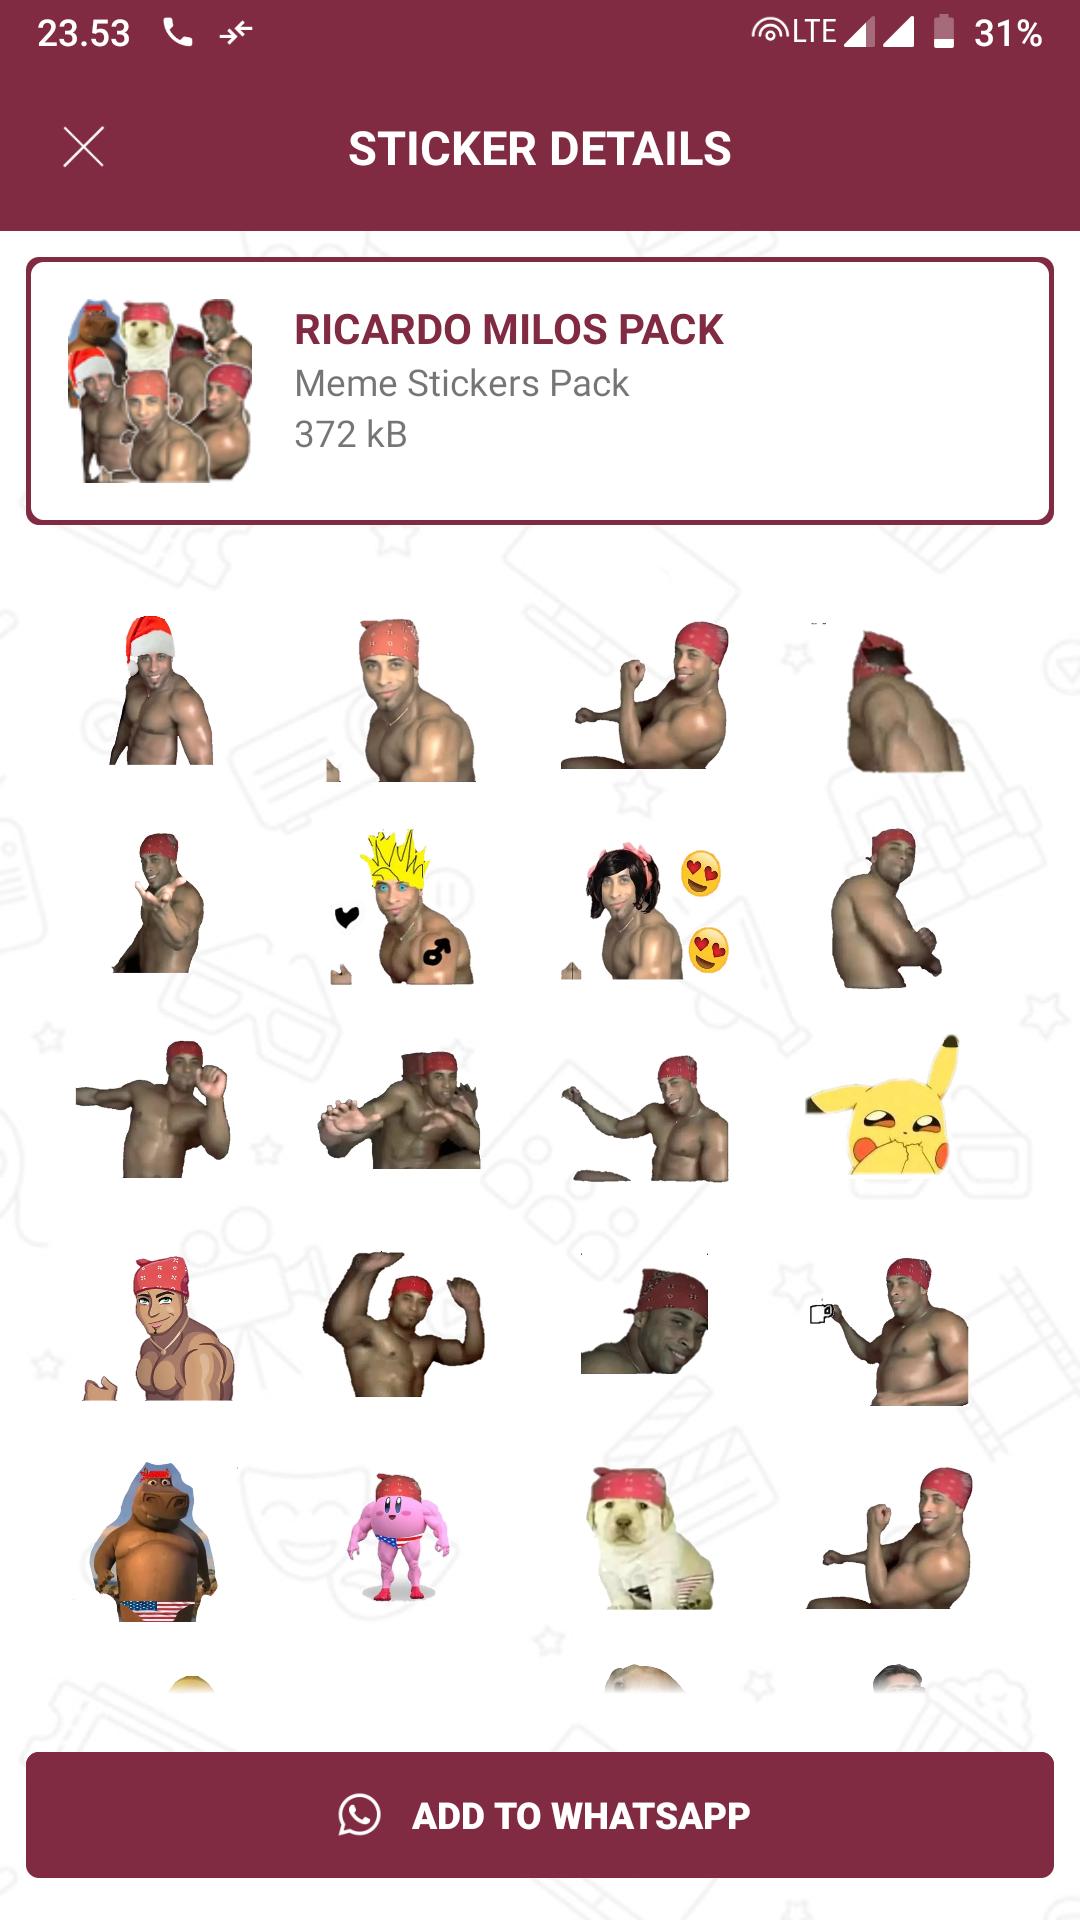 Ricardo Milos Meme Stickers Wastickerapps For Android Apk Download